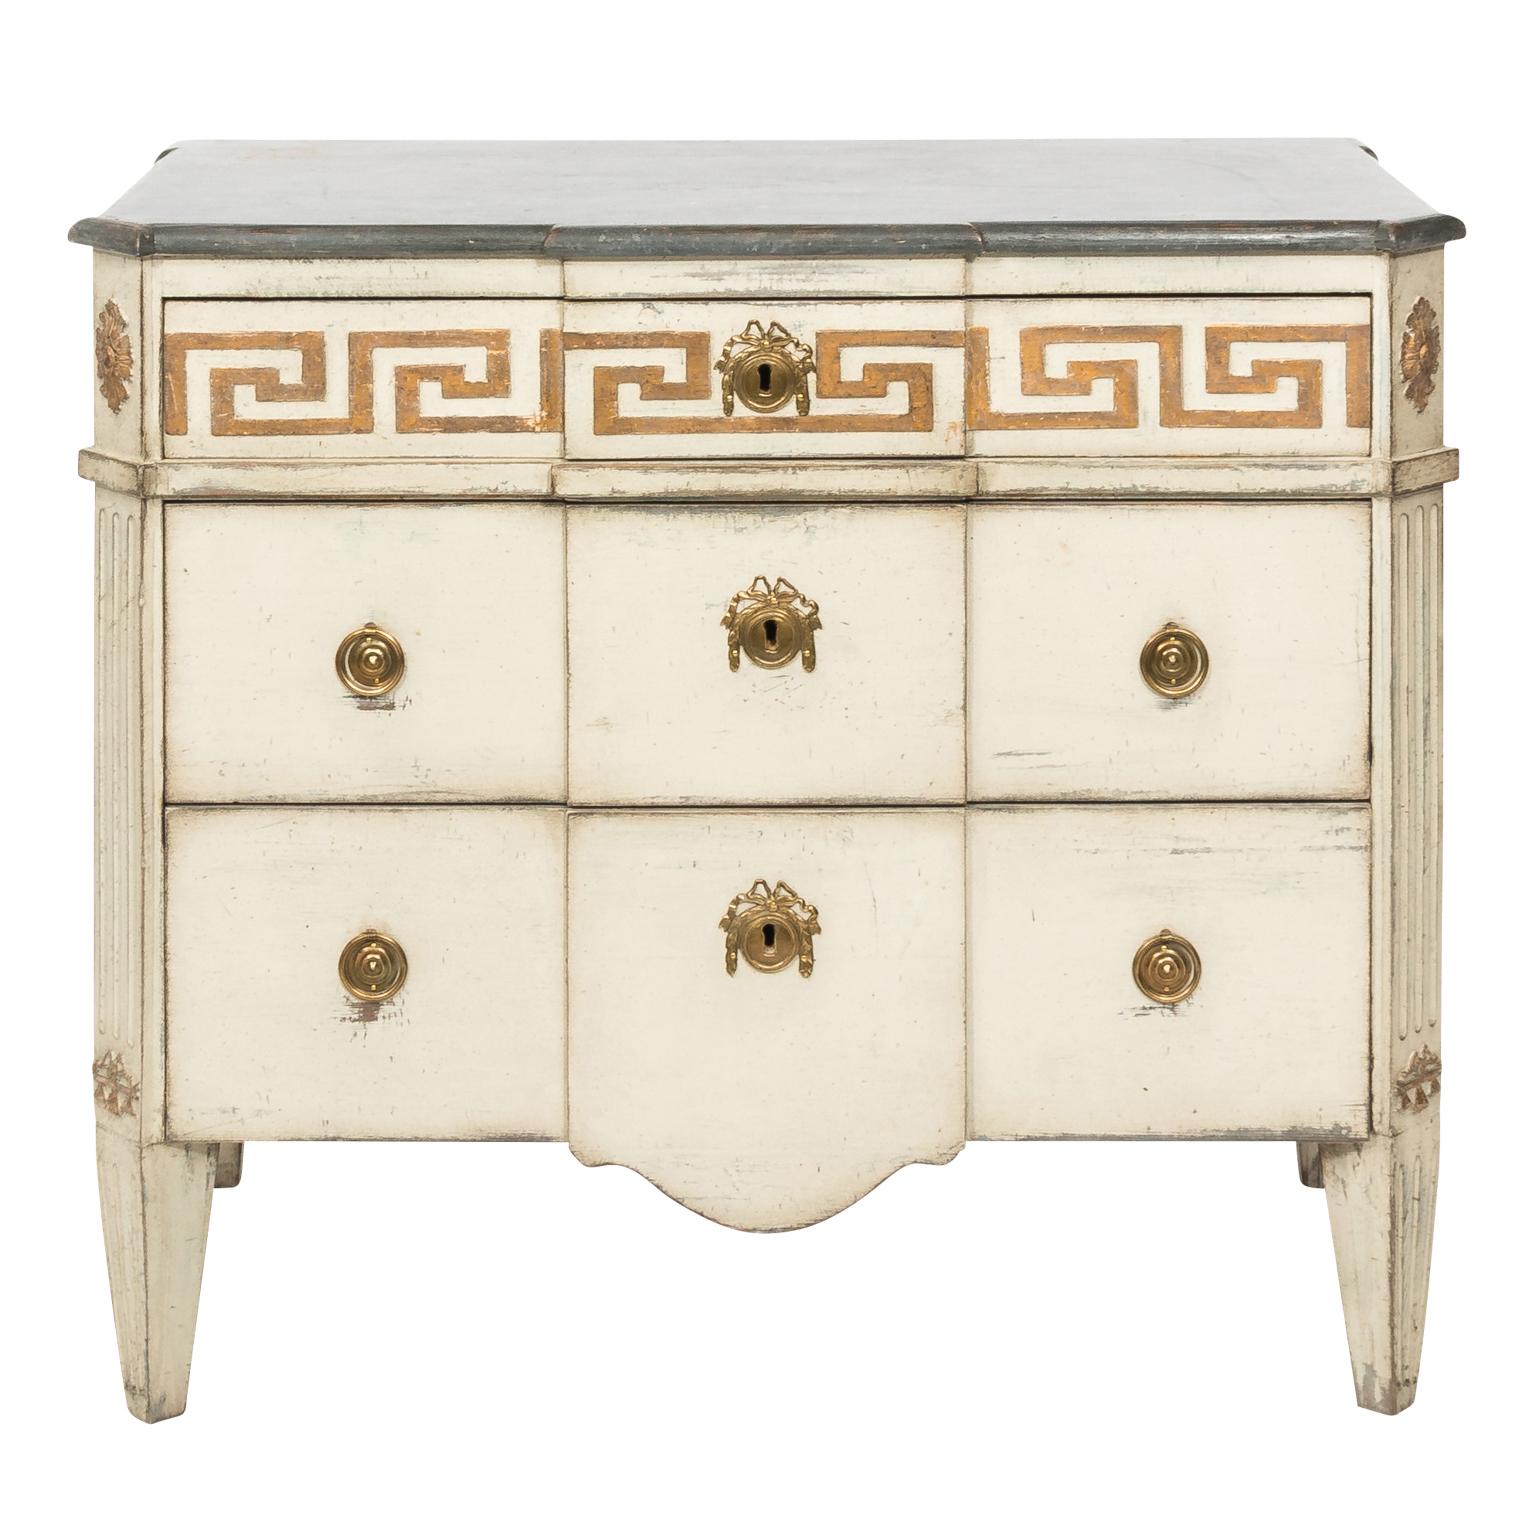 Swedish Gustavian style pair of grey painted three drawer commodes with gilded Greek key border, black faux stone top, fluted corners, and brass medallion hardware, circa 19th century. Pieces are signed on the back.
 